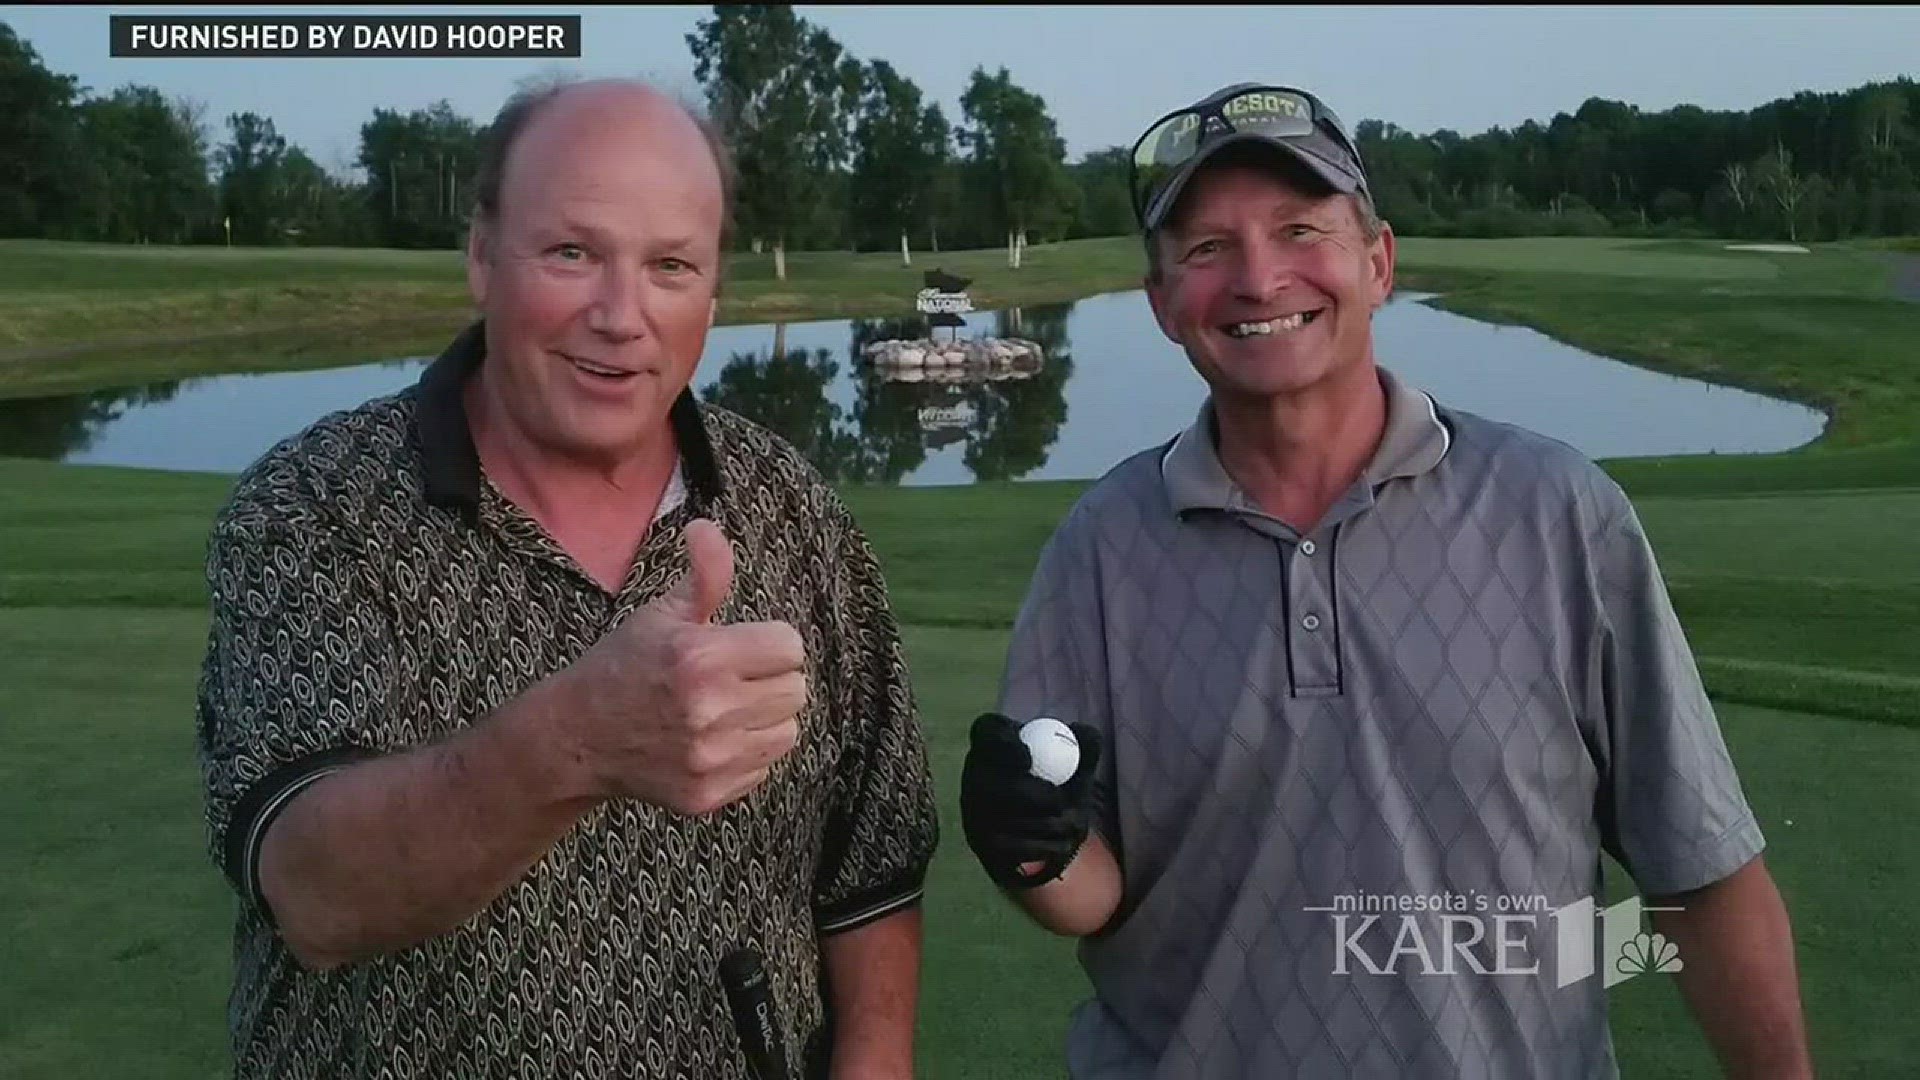 Team USA Ryder Cup fans bring strokes of luck